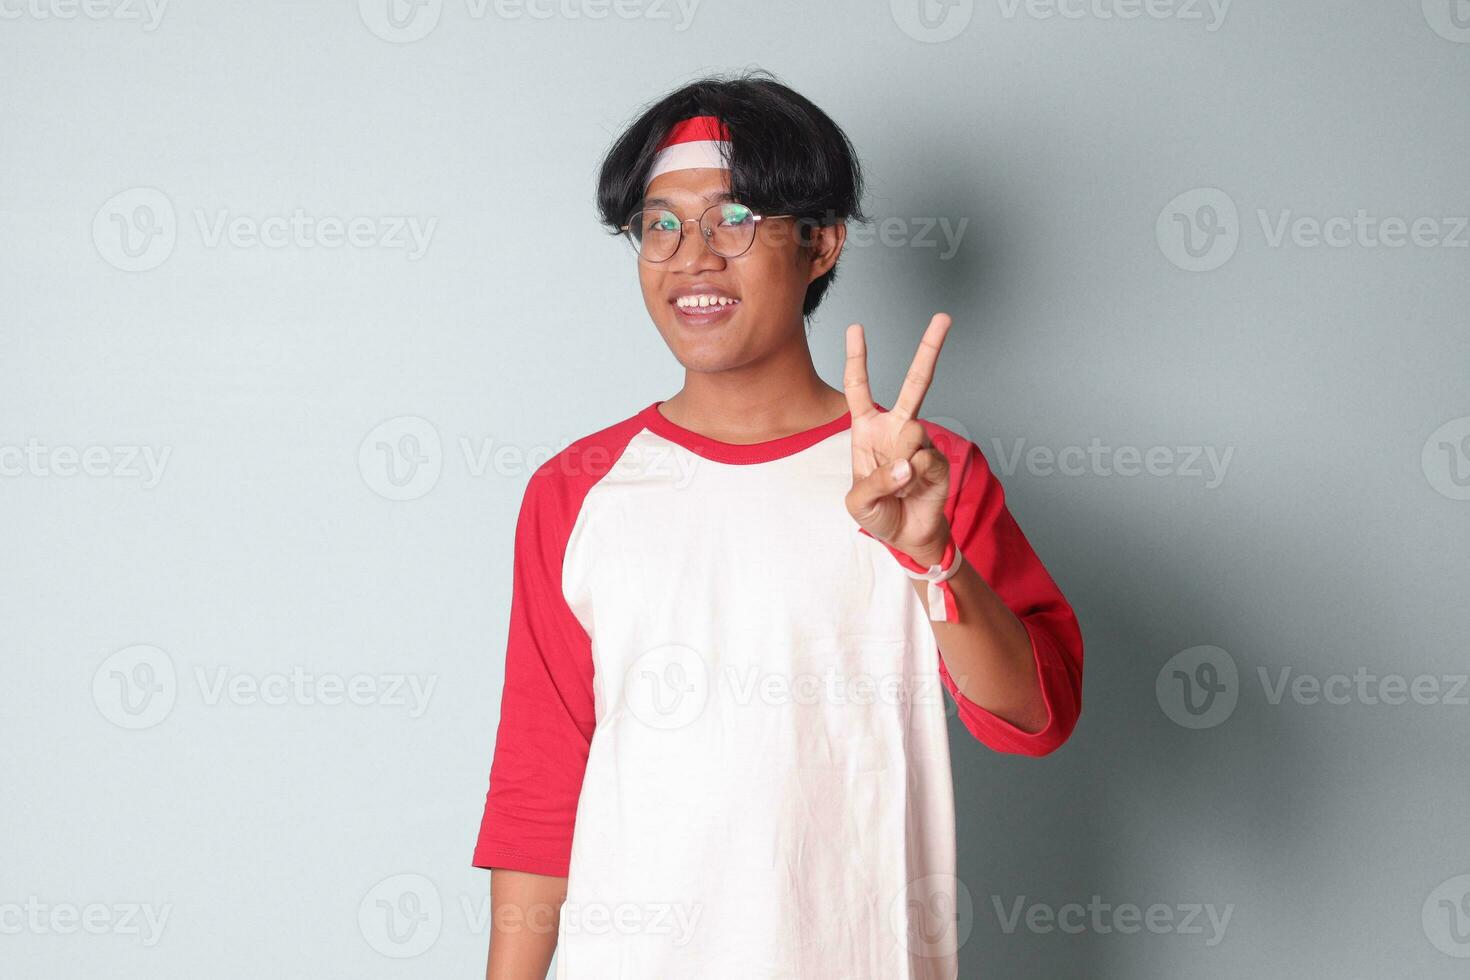 Portrait of attractive Asian man in t-shirt with red and white ribbon on head, counting two with fingers. Isolated image on gray background photo